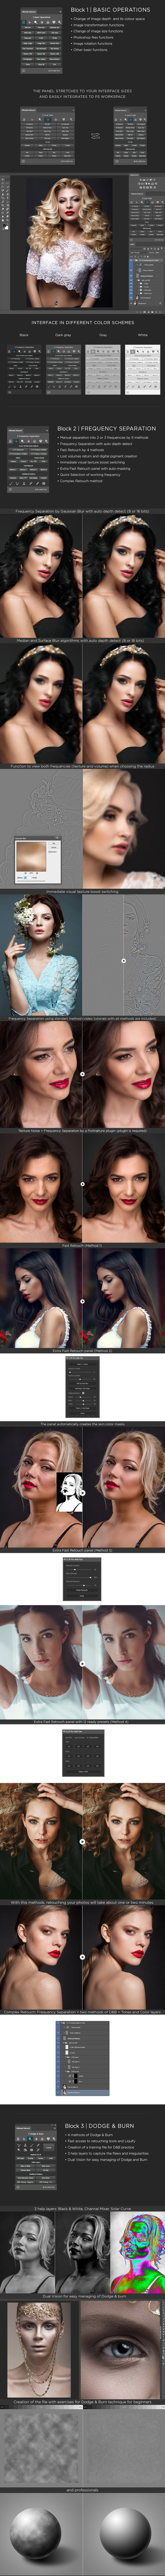 retouch retouching  retouch panel frequensy separation Digital Make Up lightroom presets photoshop actions retouch presets beauty retouch Photoshop Panel